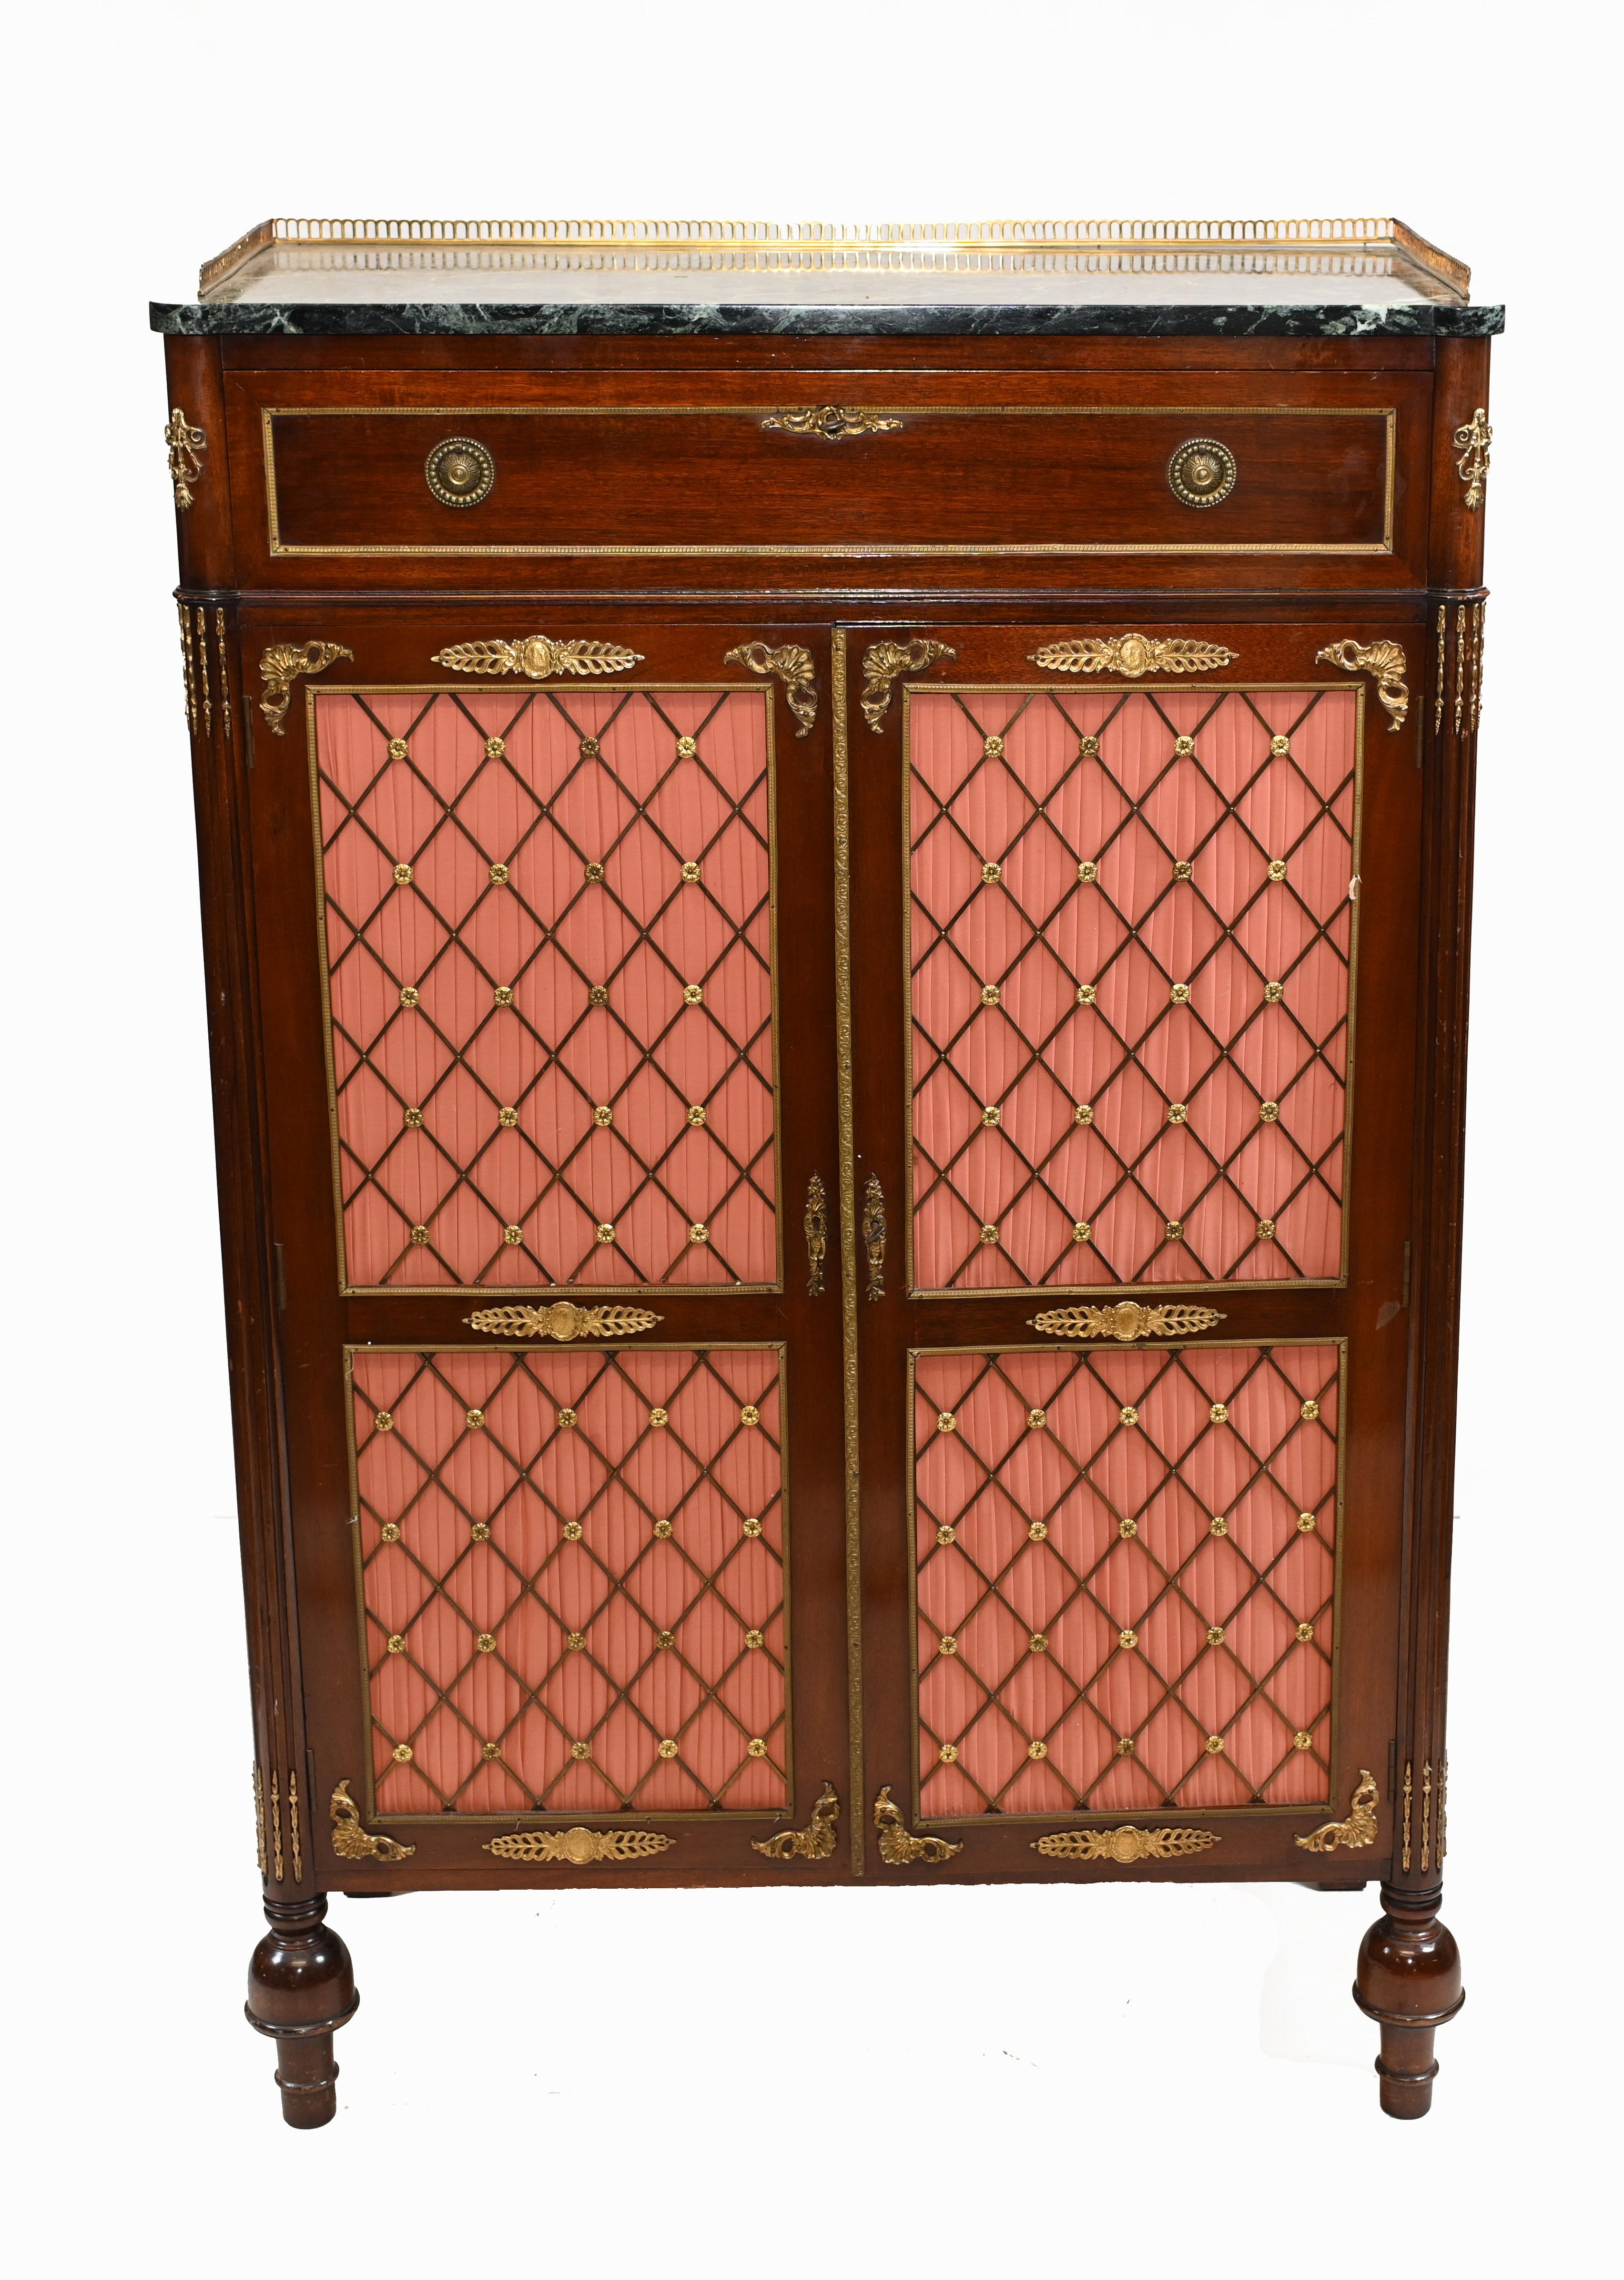 Elegant French Empire style cocktail cabinet in mahogany
Bought from a dealer on Marche Biron at the Paris antiques markets
Cocktail cabinet decorated with ormolu mounts, the doors with original diamond pattern bronze design
Circa 1890
Some of